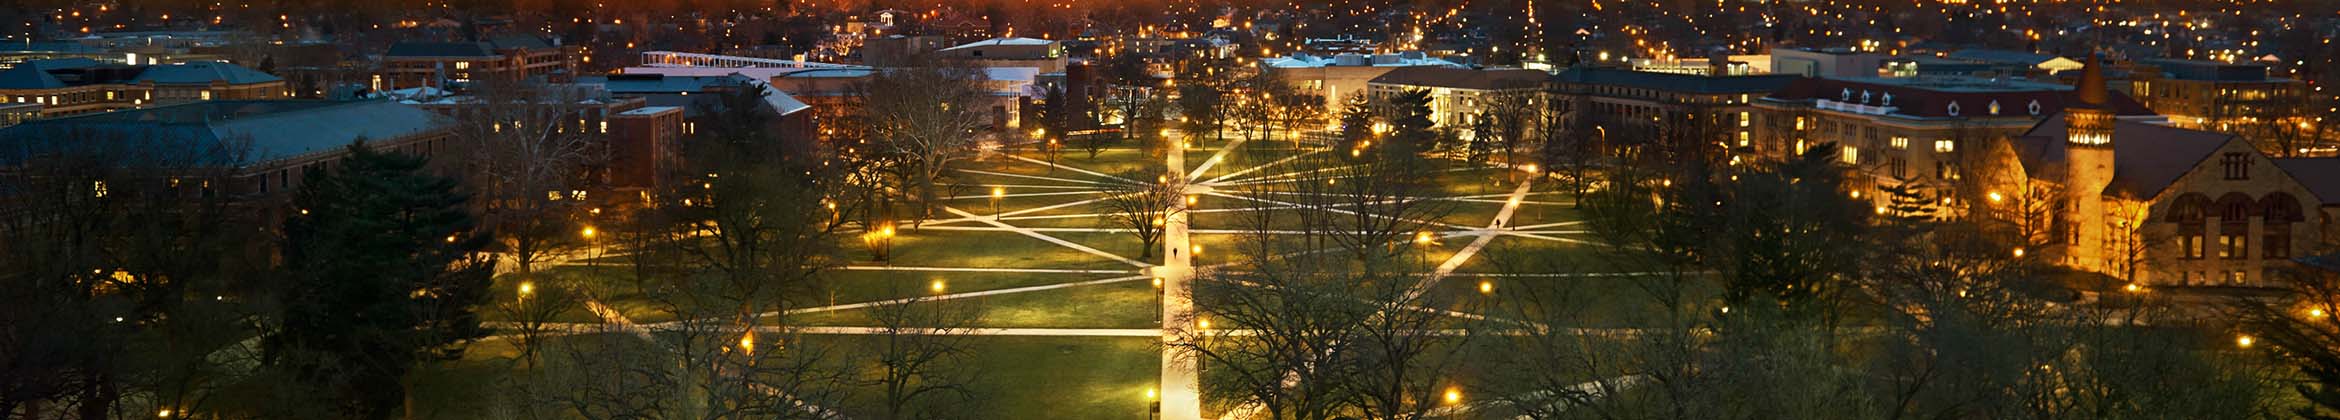 The oval at night